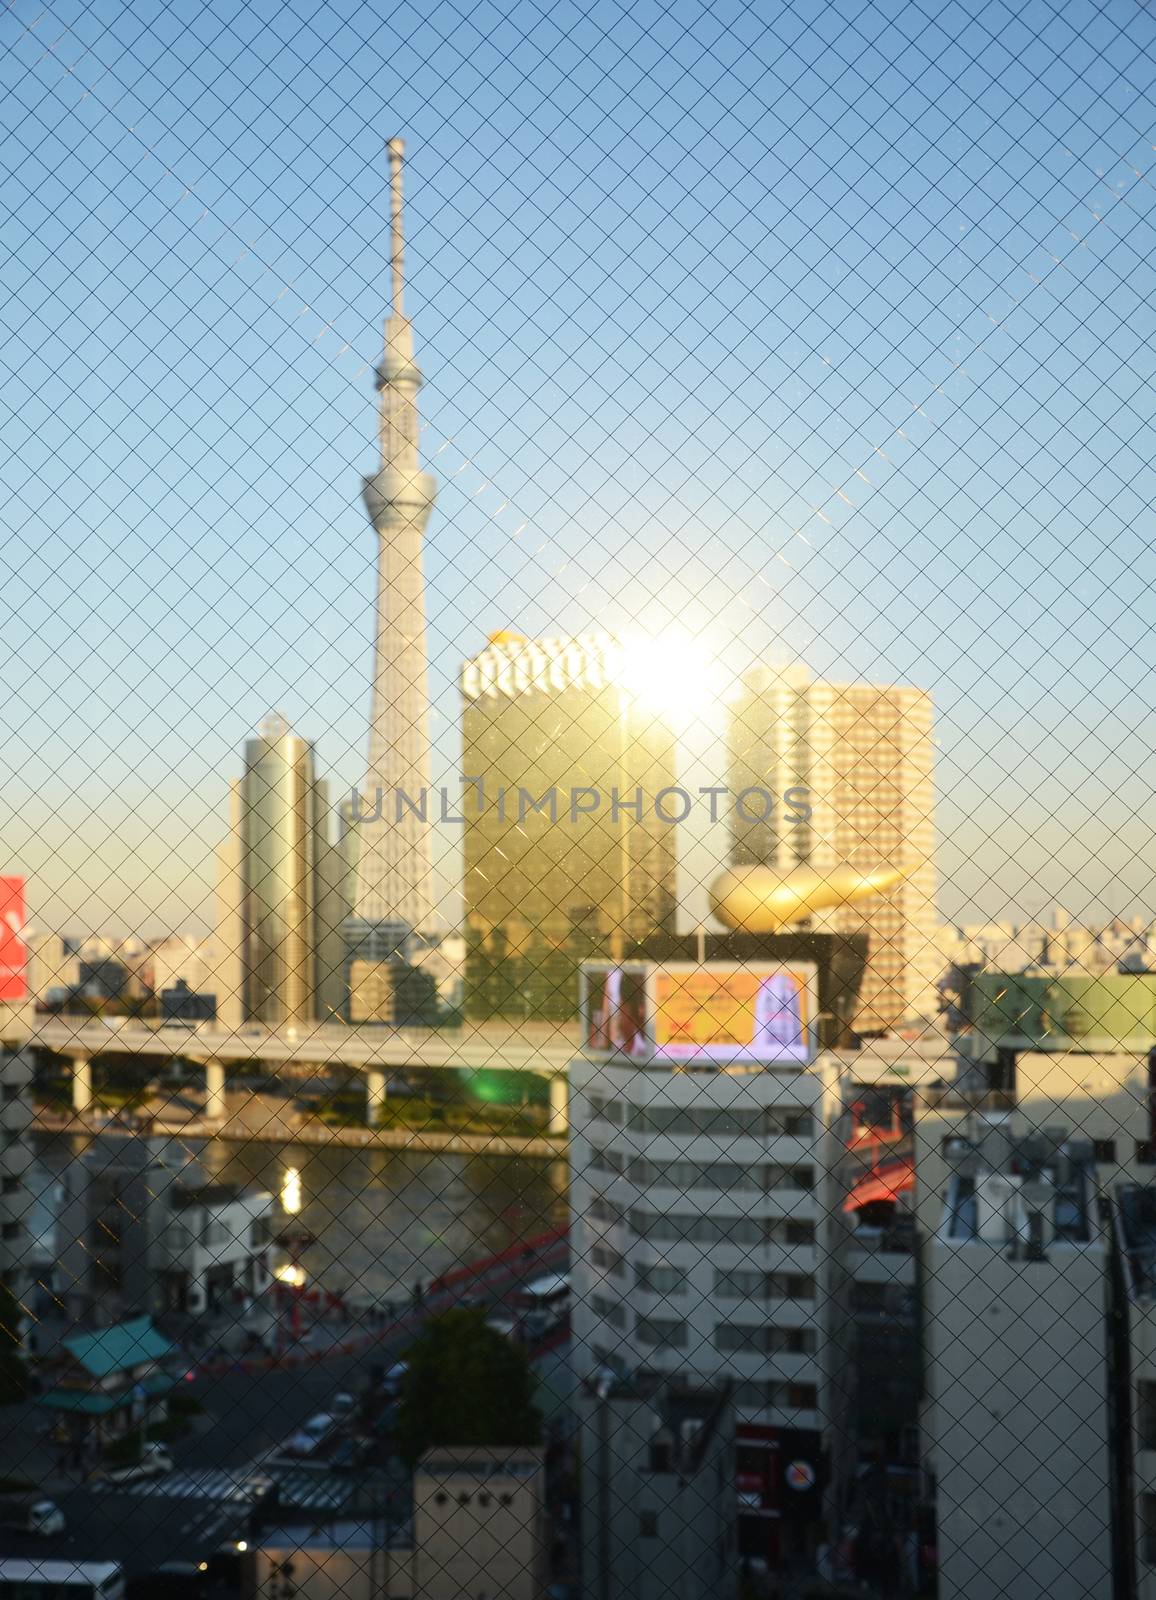 Tokyo Sky tree building at sunset through wired glass. Blurred background by siraanamwong